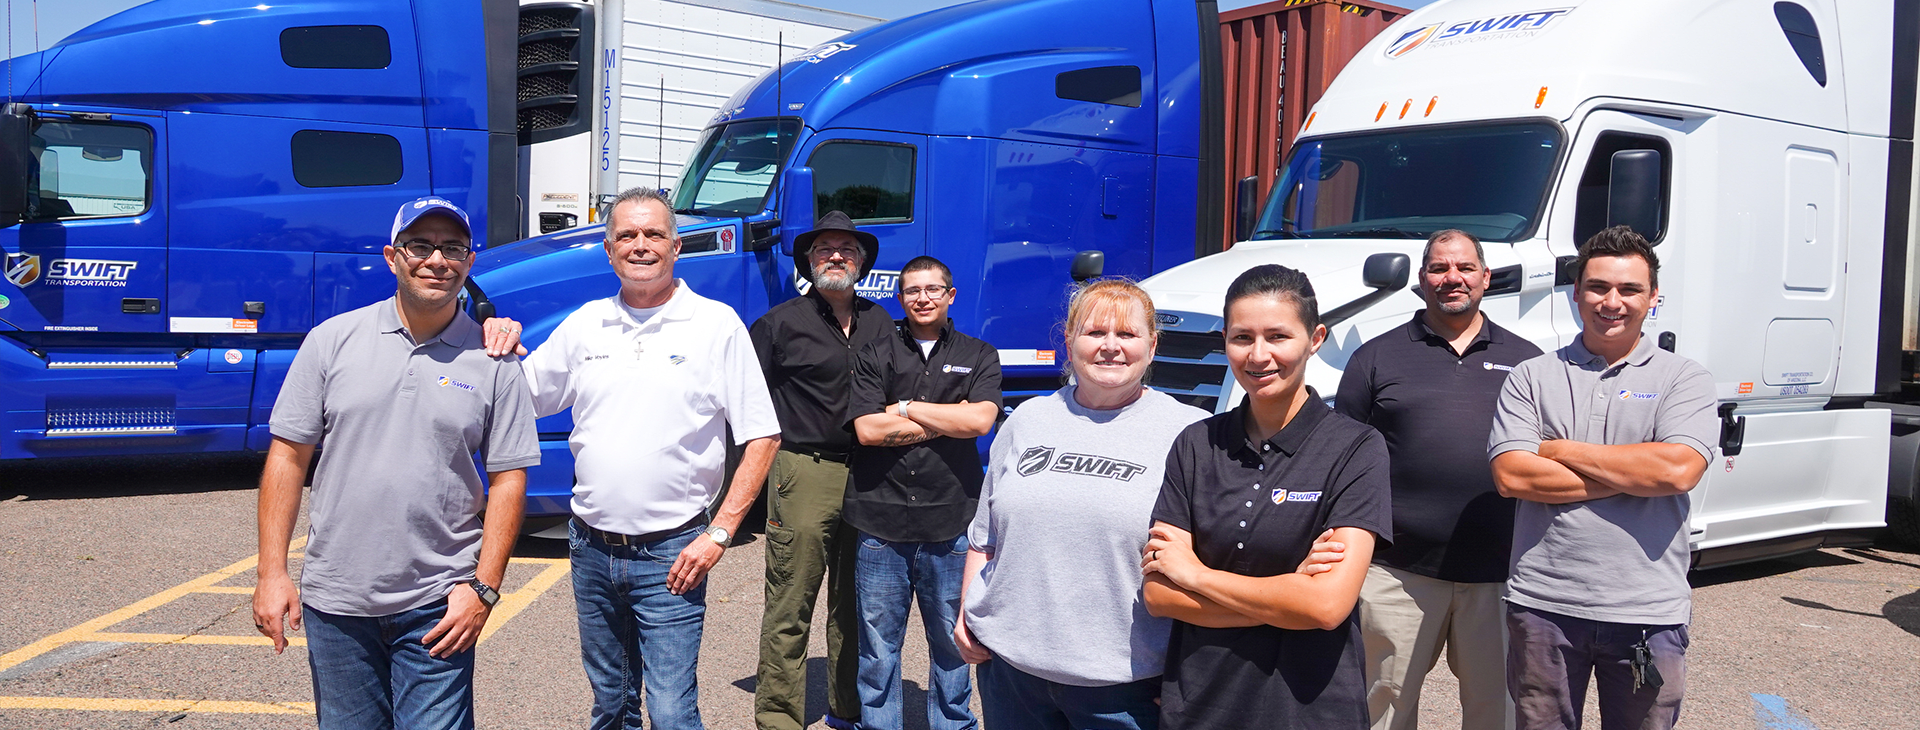 Swift Driver Mentor Program Learn from the Best in the Trucking Industry